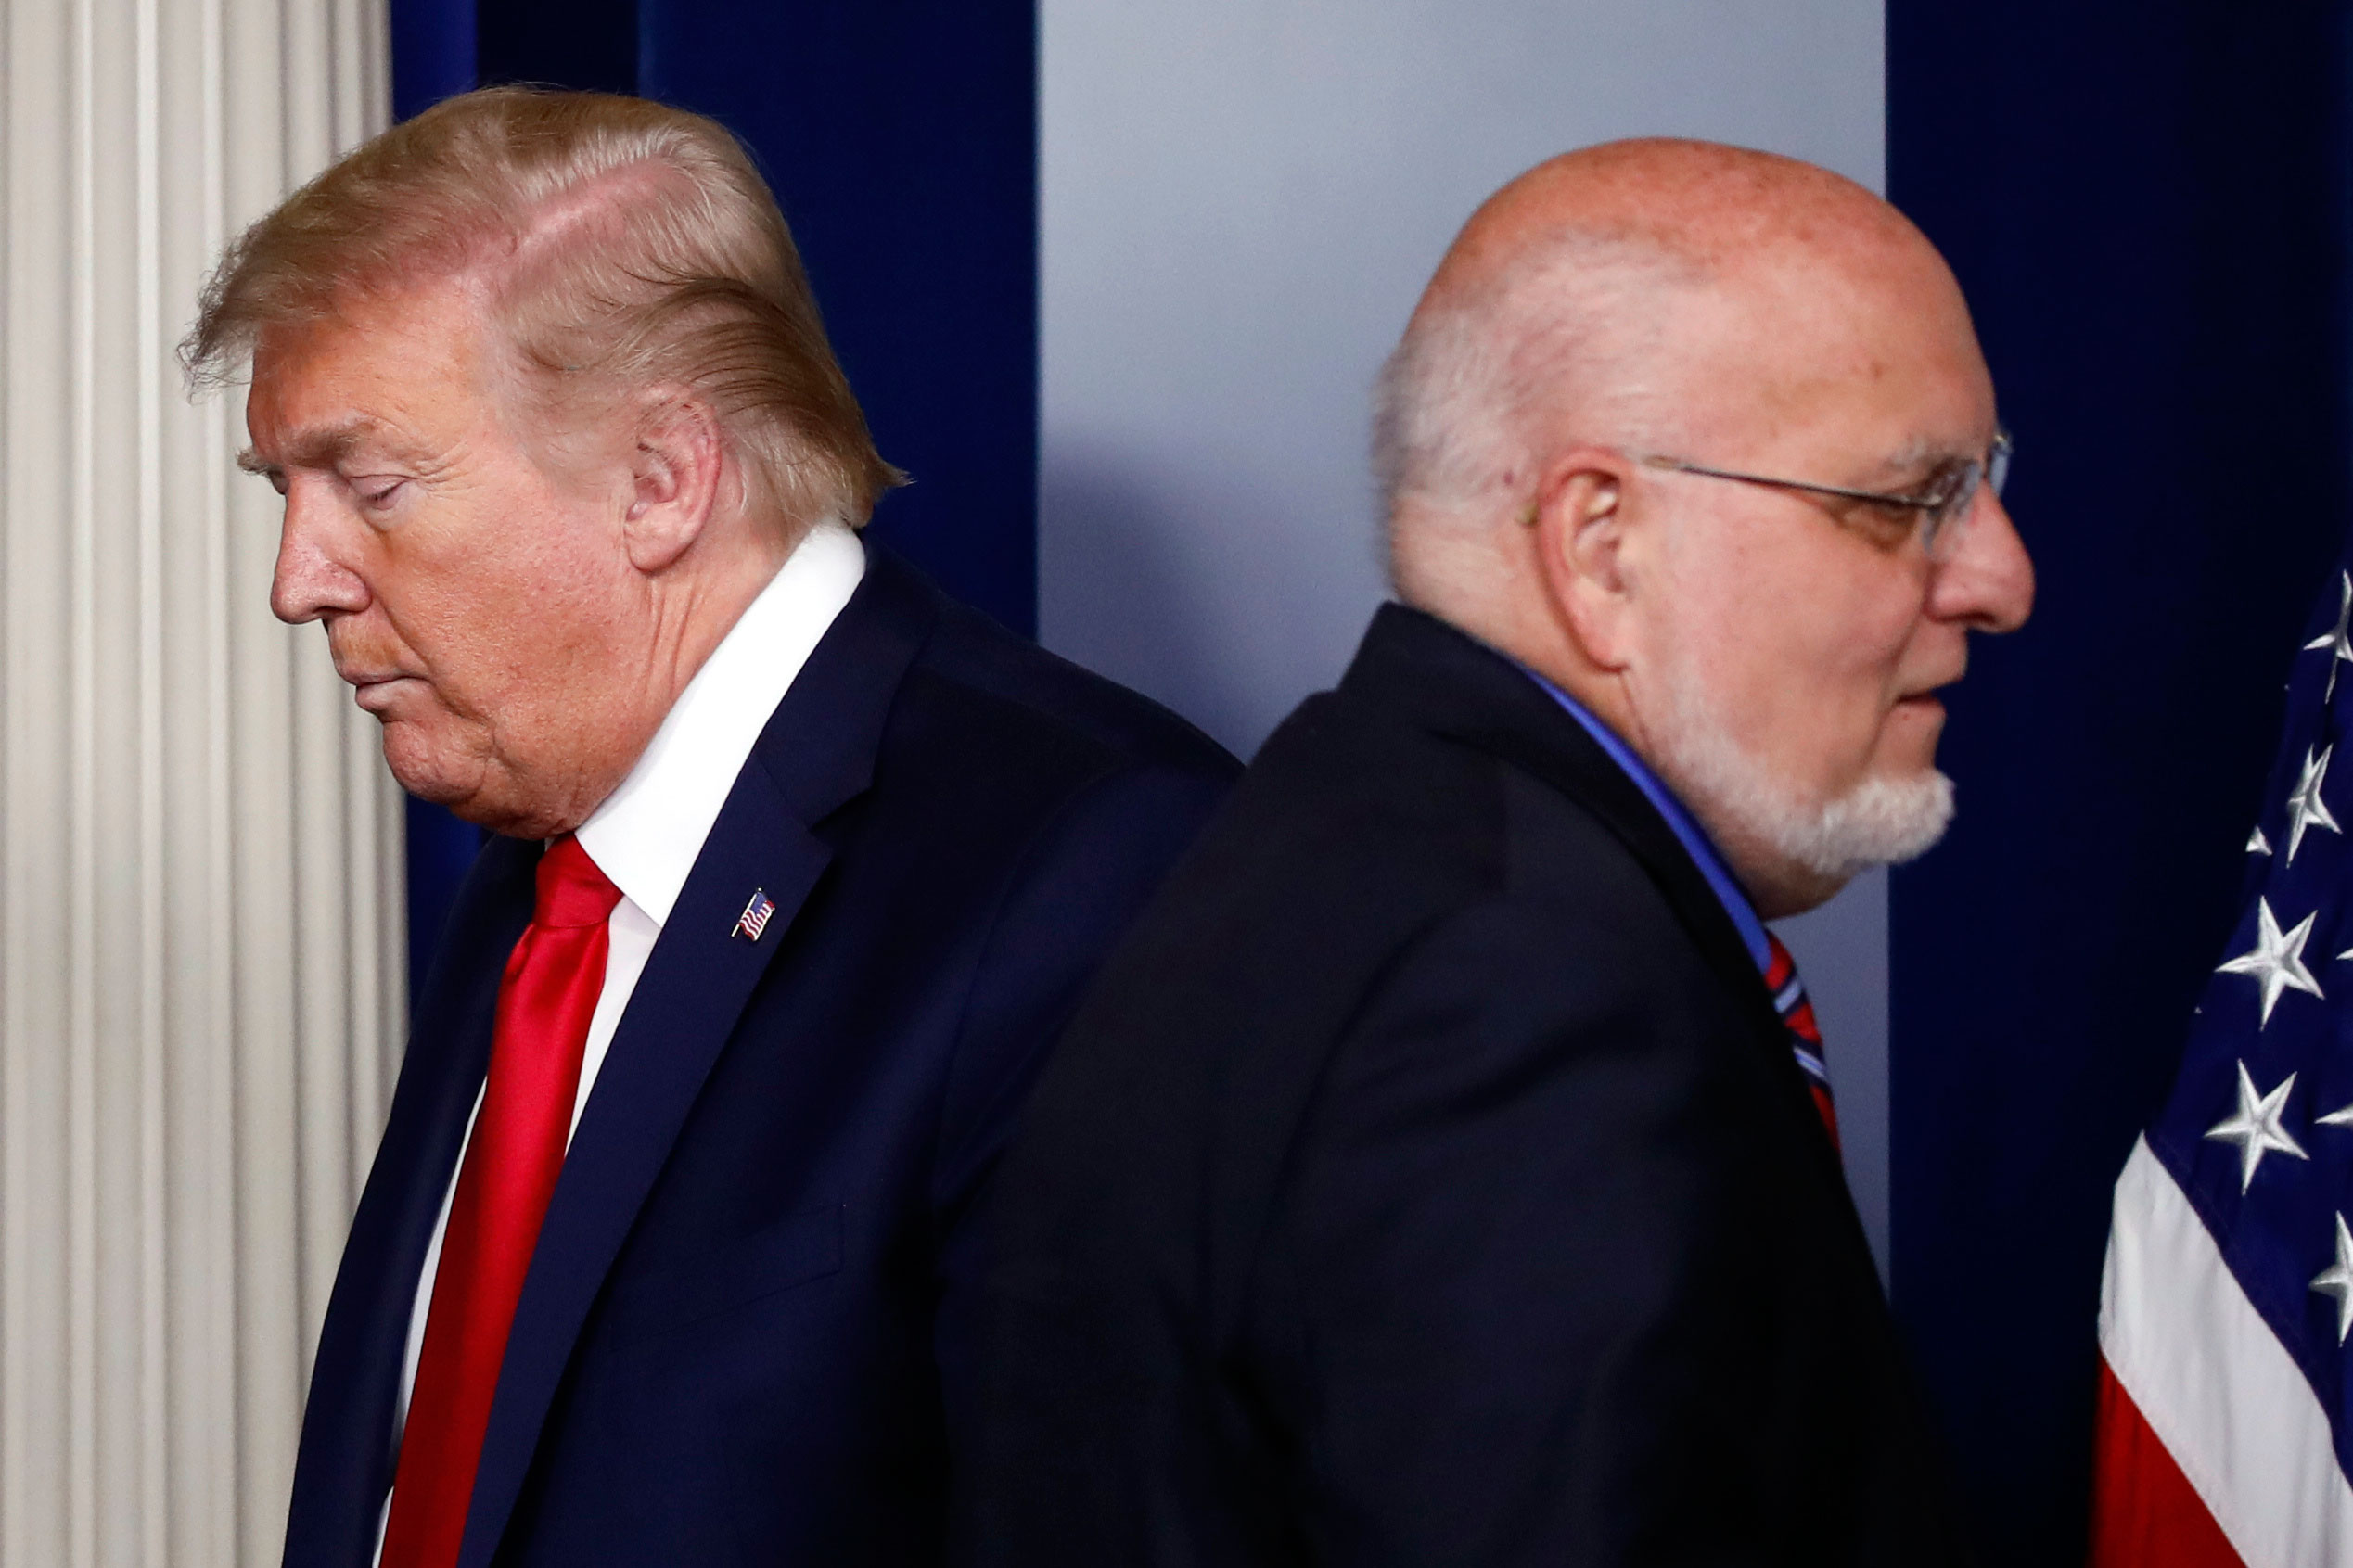 President Donald Trump and CDC Director Robert Redfield attend the daily coronavirus briefing at the White House, in Washington, on April 22.